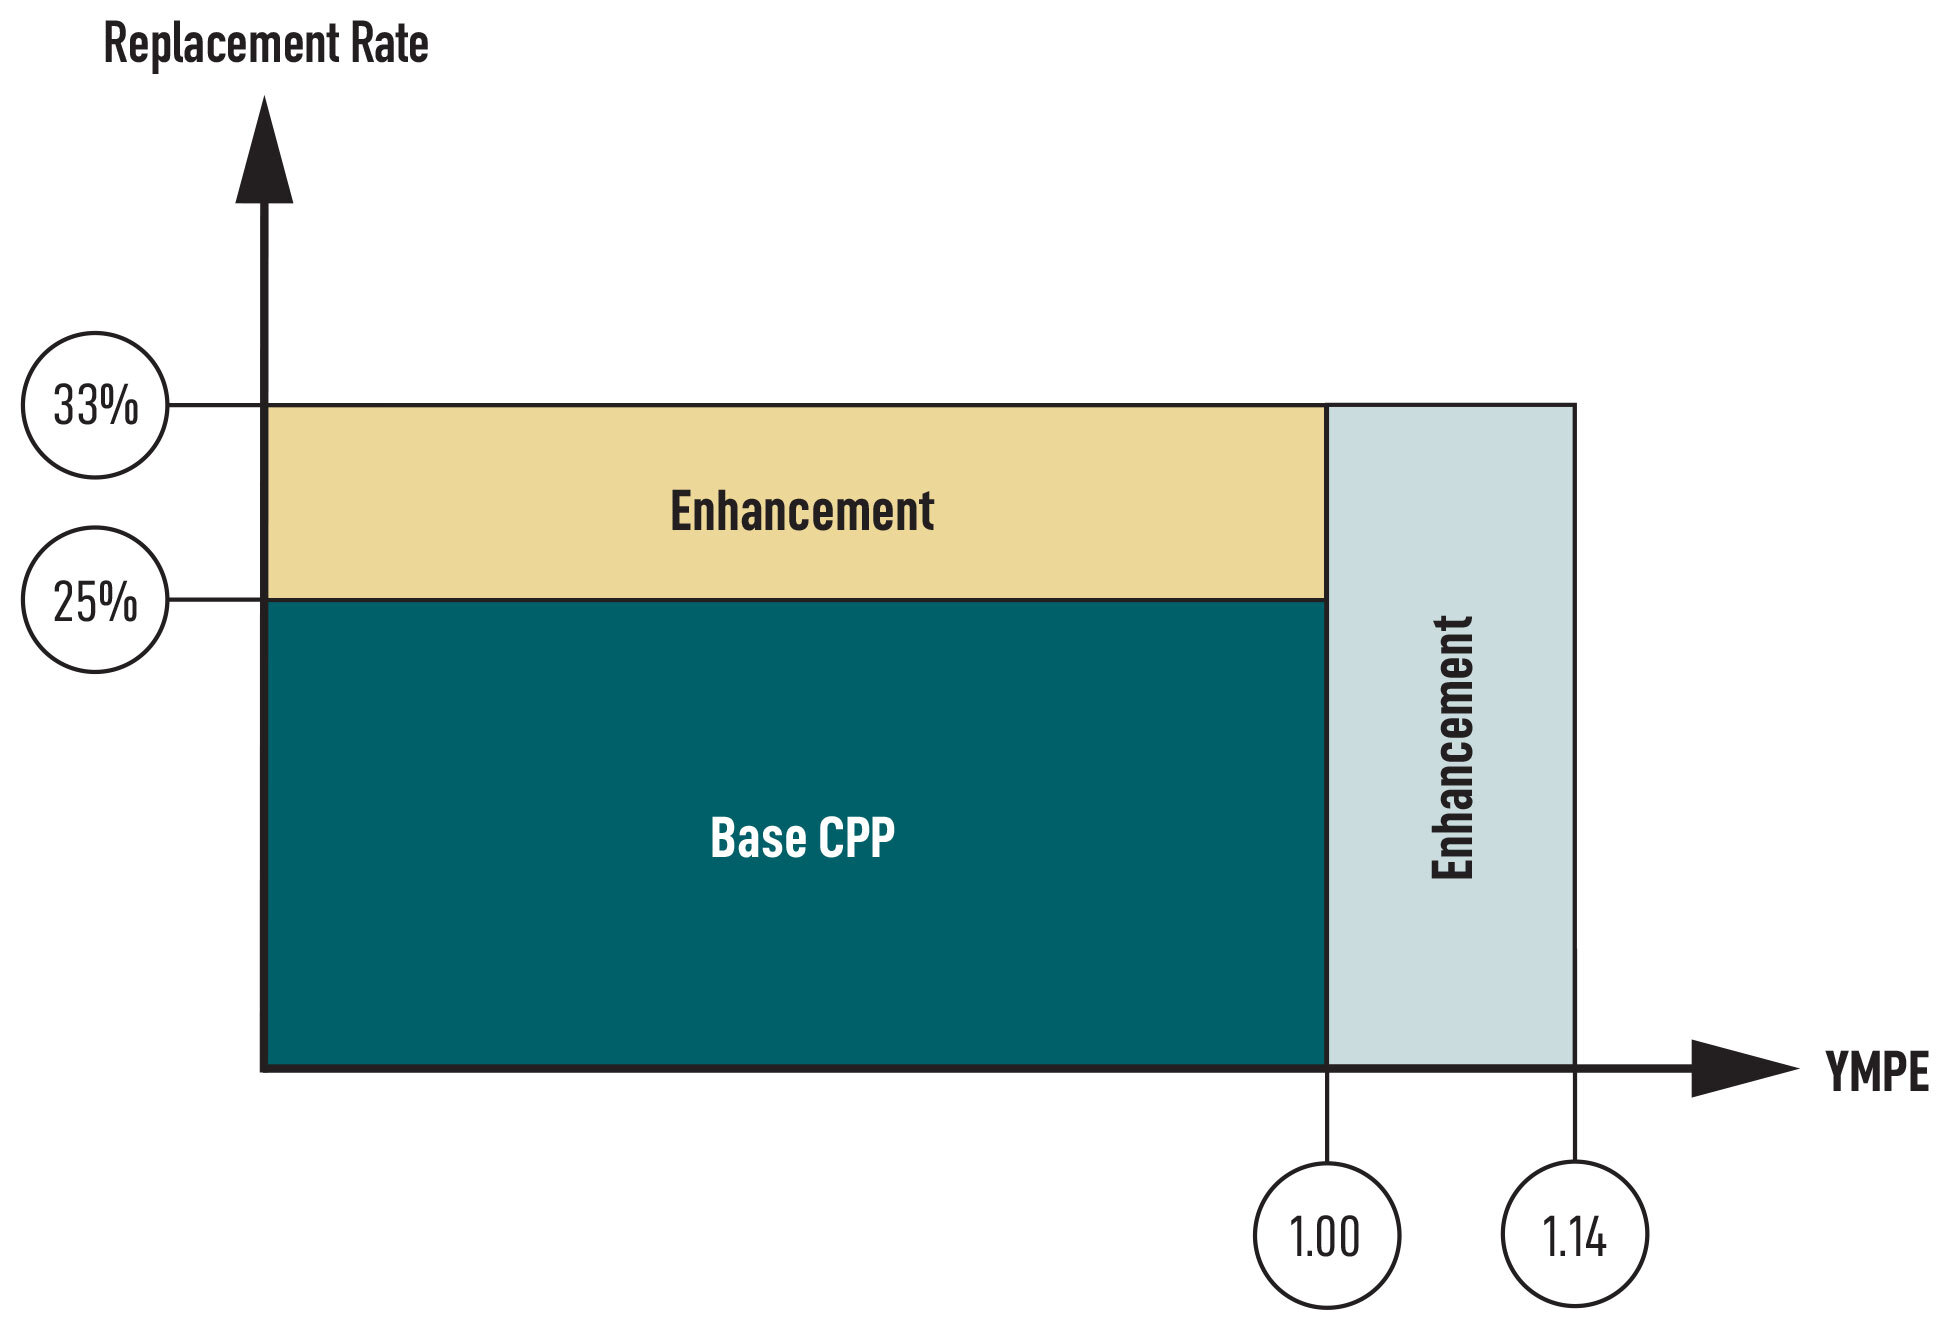  Illustration of enhancement replacement rate and year’s maximum pensionable earnings (YMPE)